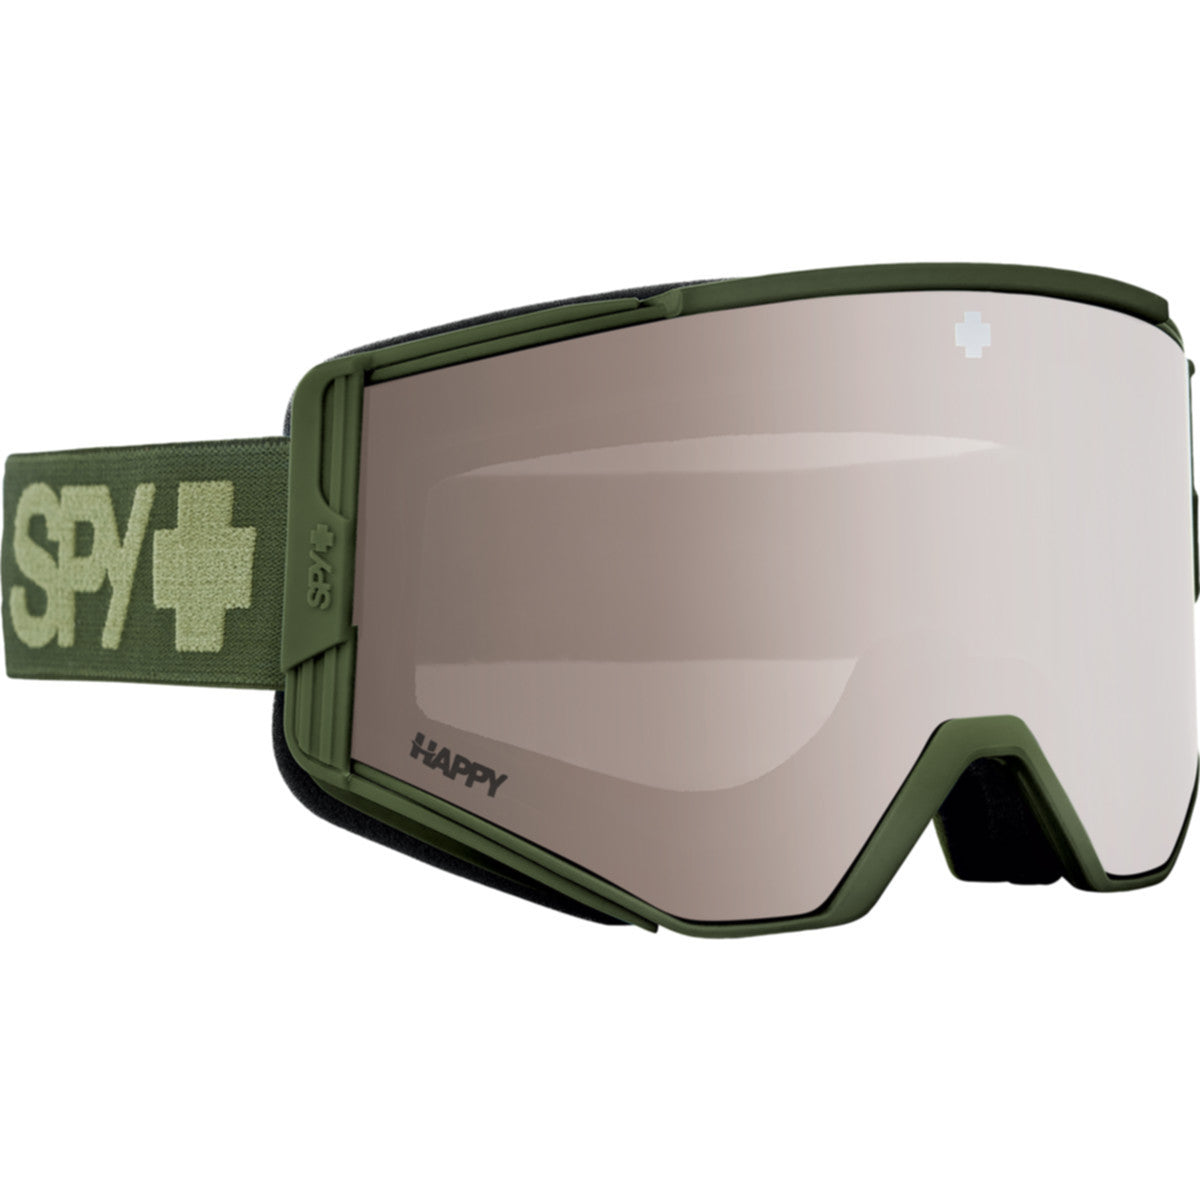 Spy Ace Goggles  Matte Olive Green One size